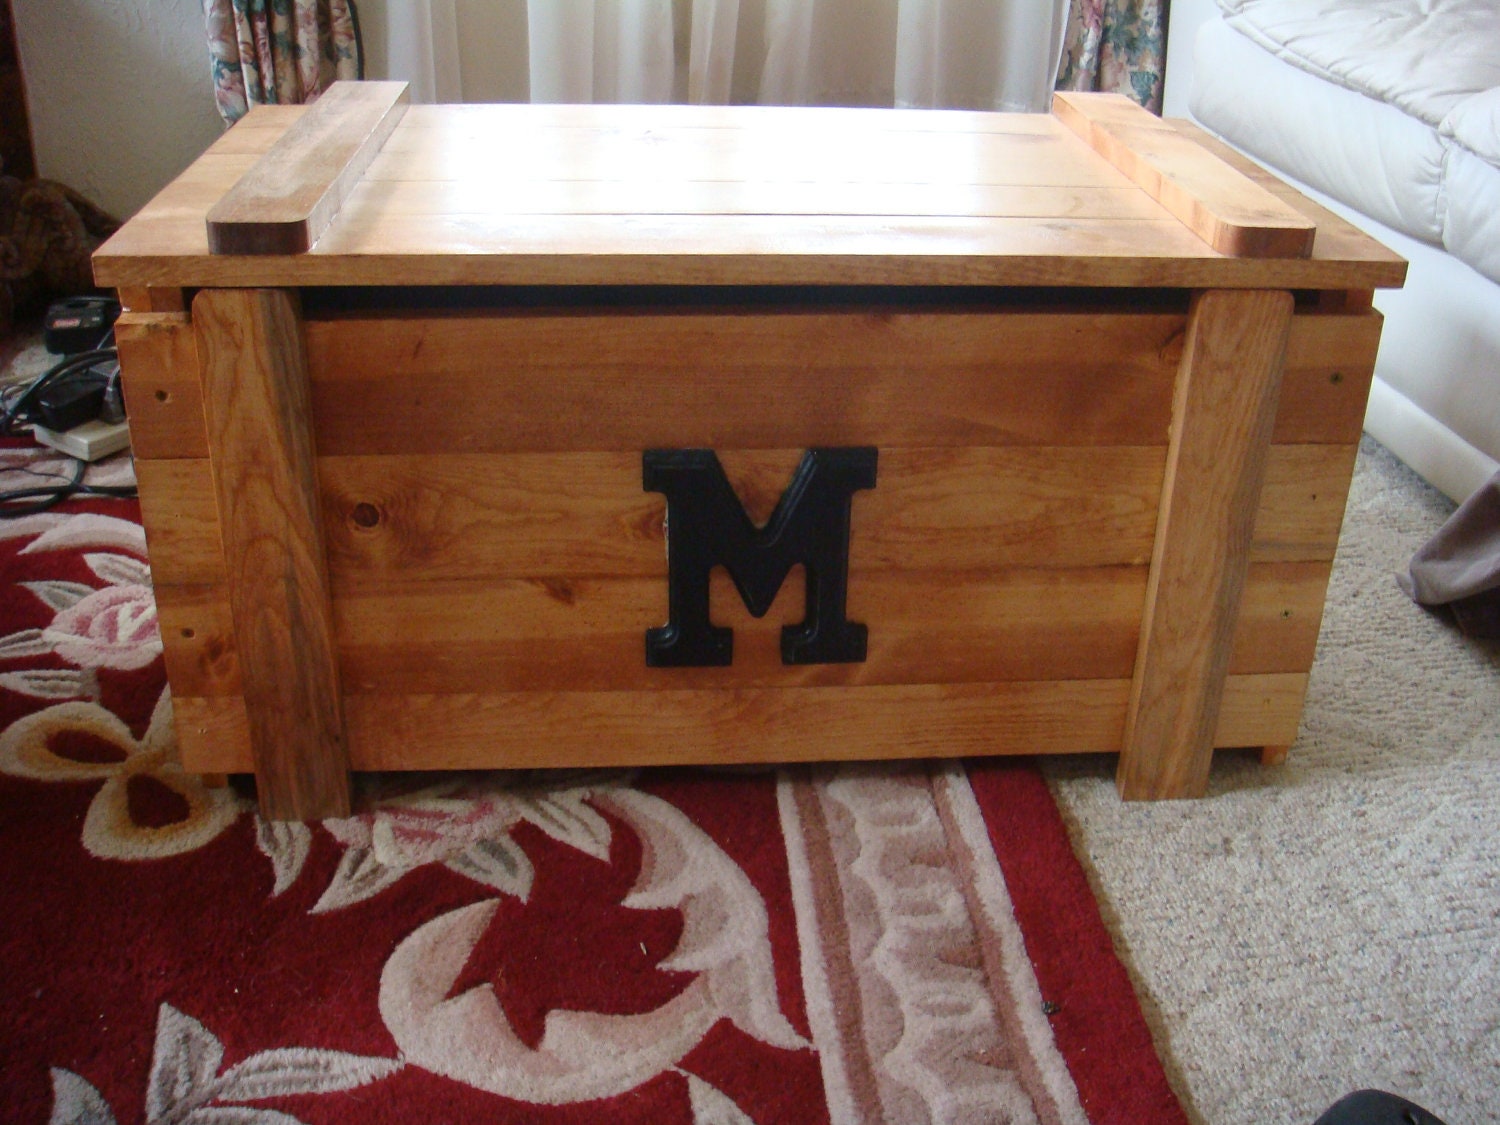 Wooden Toy Box / Blanket Chest with monogram